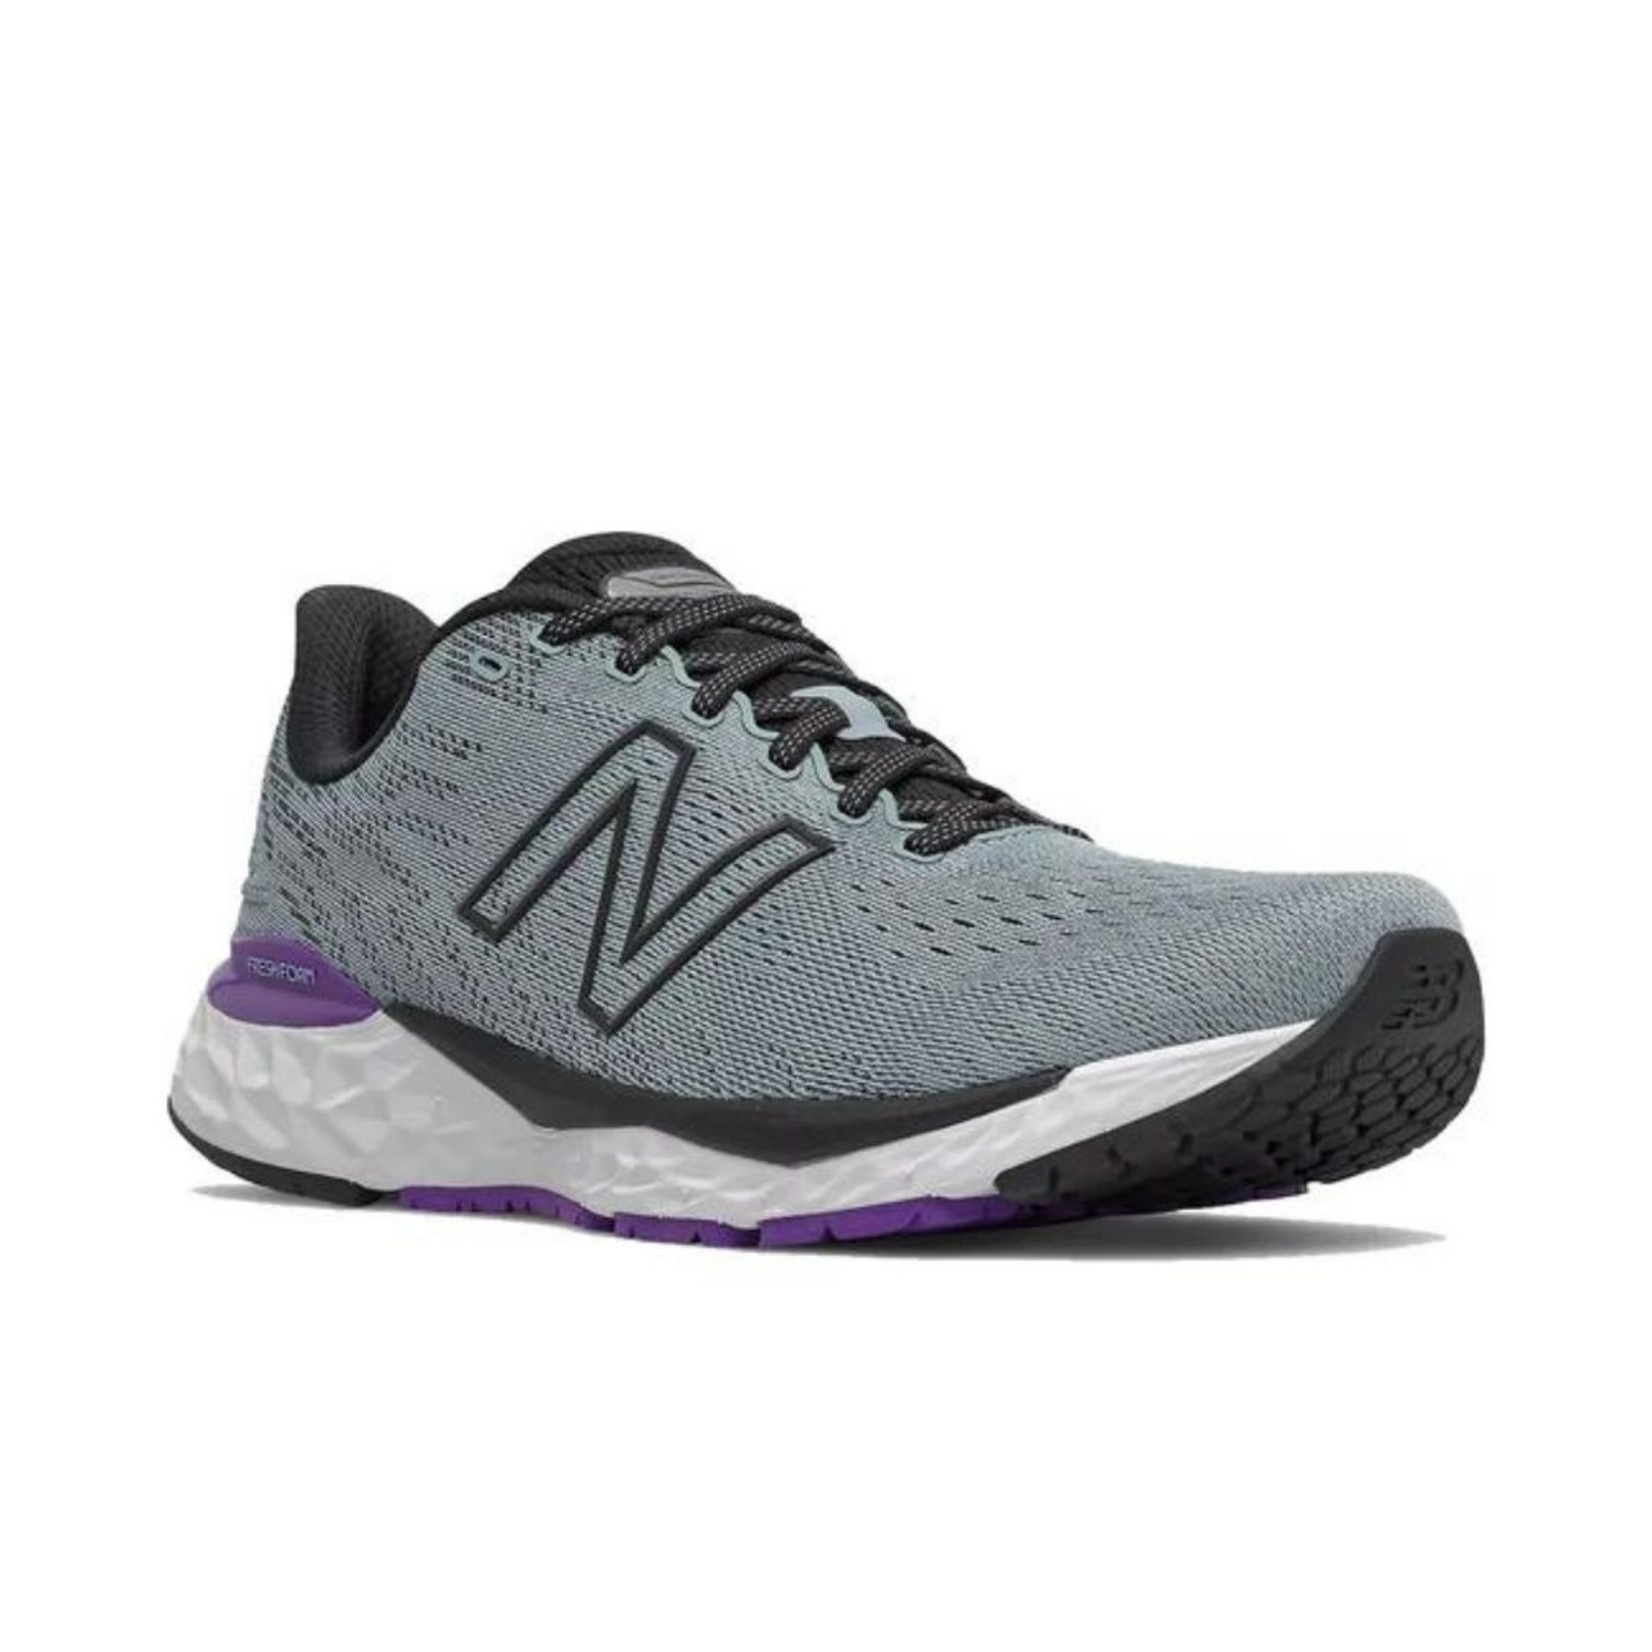 New Balance New Balance M880V11 Limited Edition Men’s Running Shoes